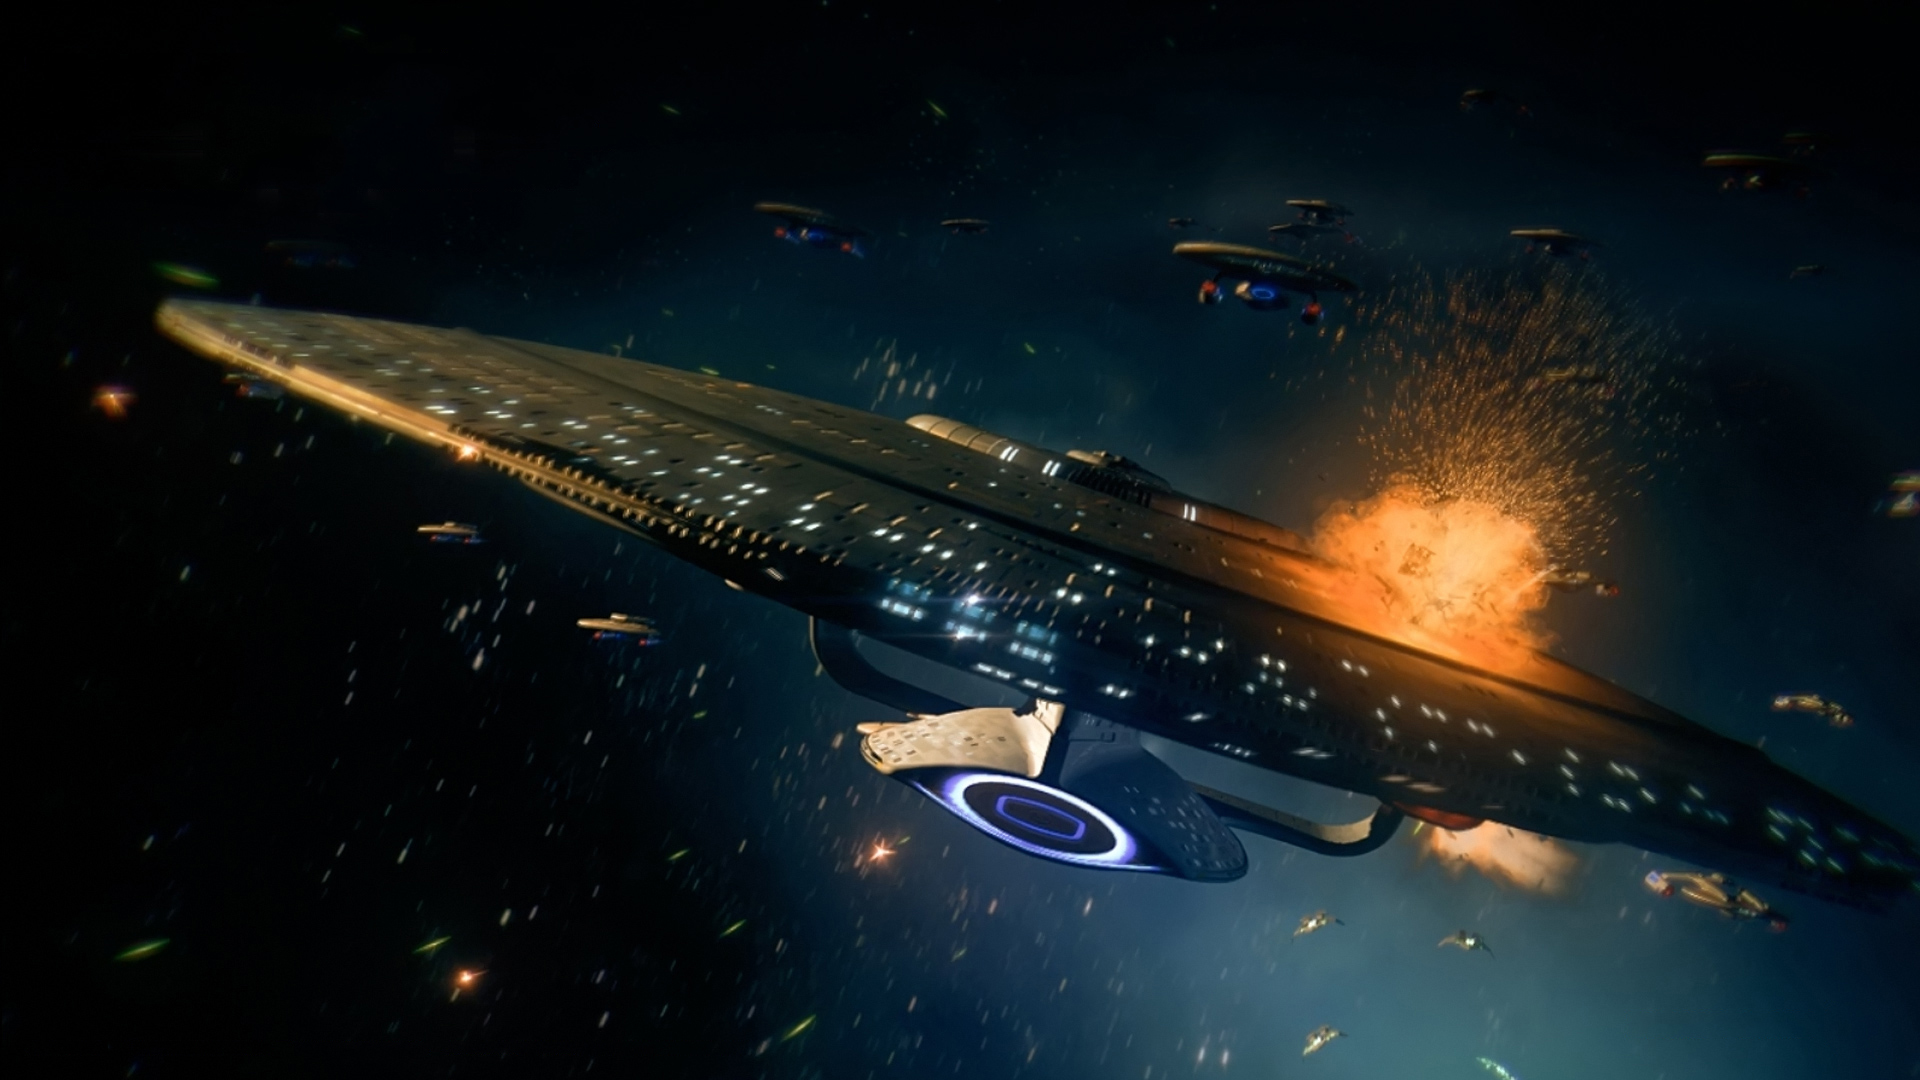  on November By Stephen Comments Off on Star Trek HD Wallpapers